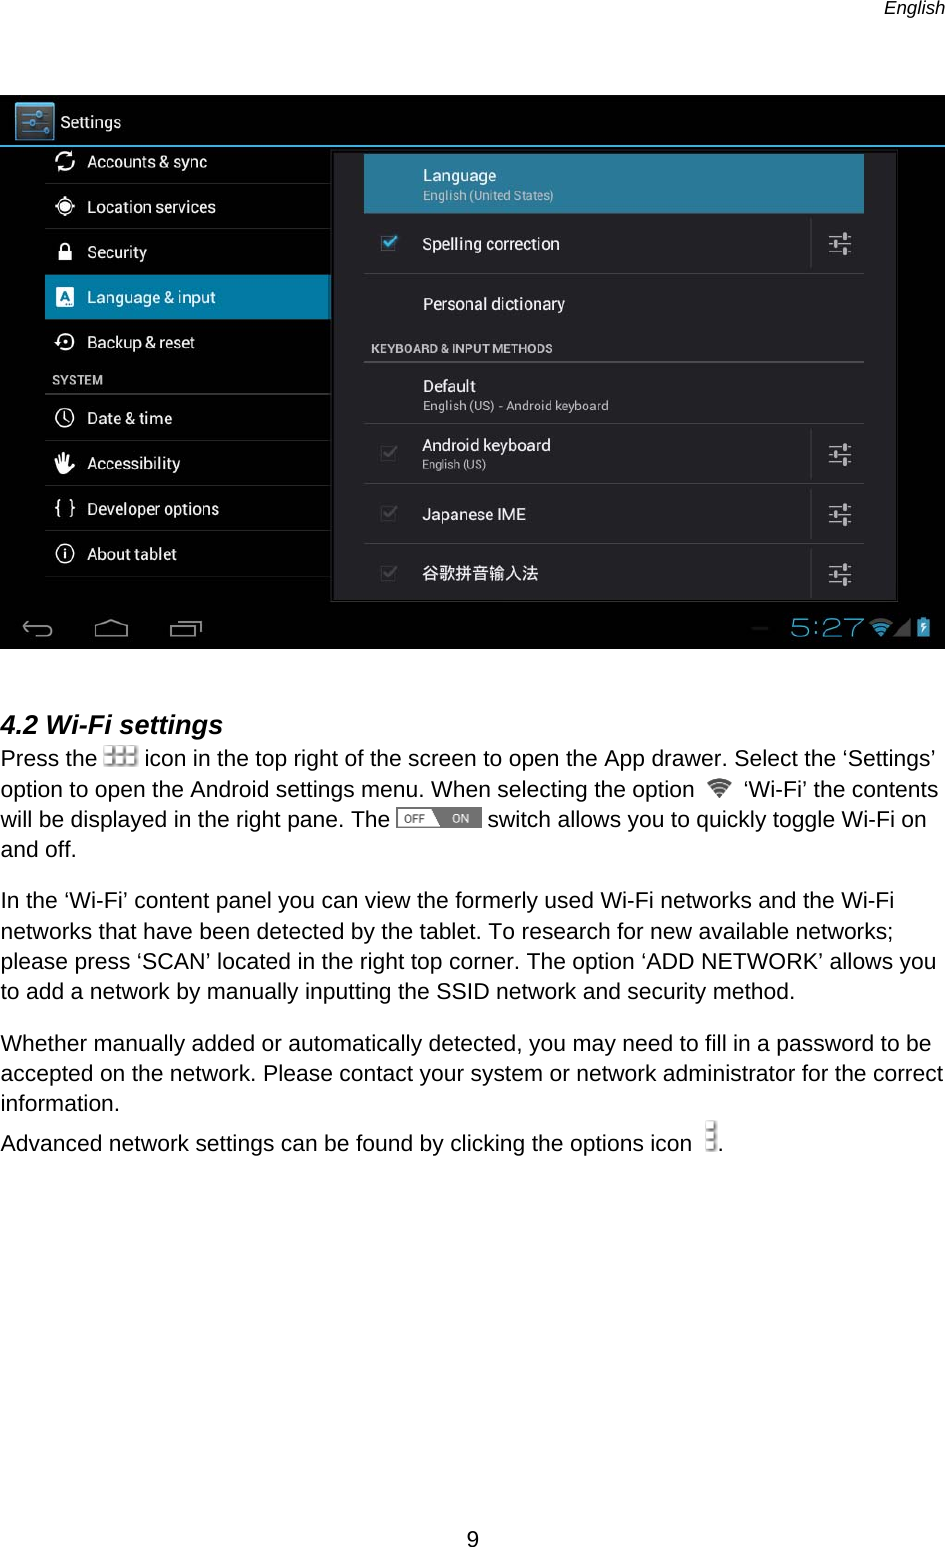   English   9    4.2 Wi-Fi settings Press the   icon in the top right of the screen to open the App drawer. Select the ‘Settings’ option to open the Android settings menu. When selecting the option   ‘Wi-Fi’ the contents will be displayed in the right pane. The   switch allows you to quickly toggle Wi-Fi on and off. In the ‘Wi-Fi’ content panel you can view the formerly used Wi-Fi networks and the Wi-Fi networks that have been detected by the tablet. To research for new available networks; please press ‘SCAN’ located in the right top corner. The option ‘ADD NETWORK’ allows you to add a network by manually inputting the SSID network and security method. Whether manually added or automatically detected, you may need to fill in a password to be accepted on the network. Please contact your system or network administrator for the correct information.  Advanced network settings can be found by clicking the options icon   .   